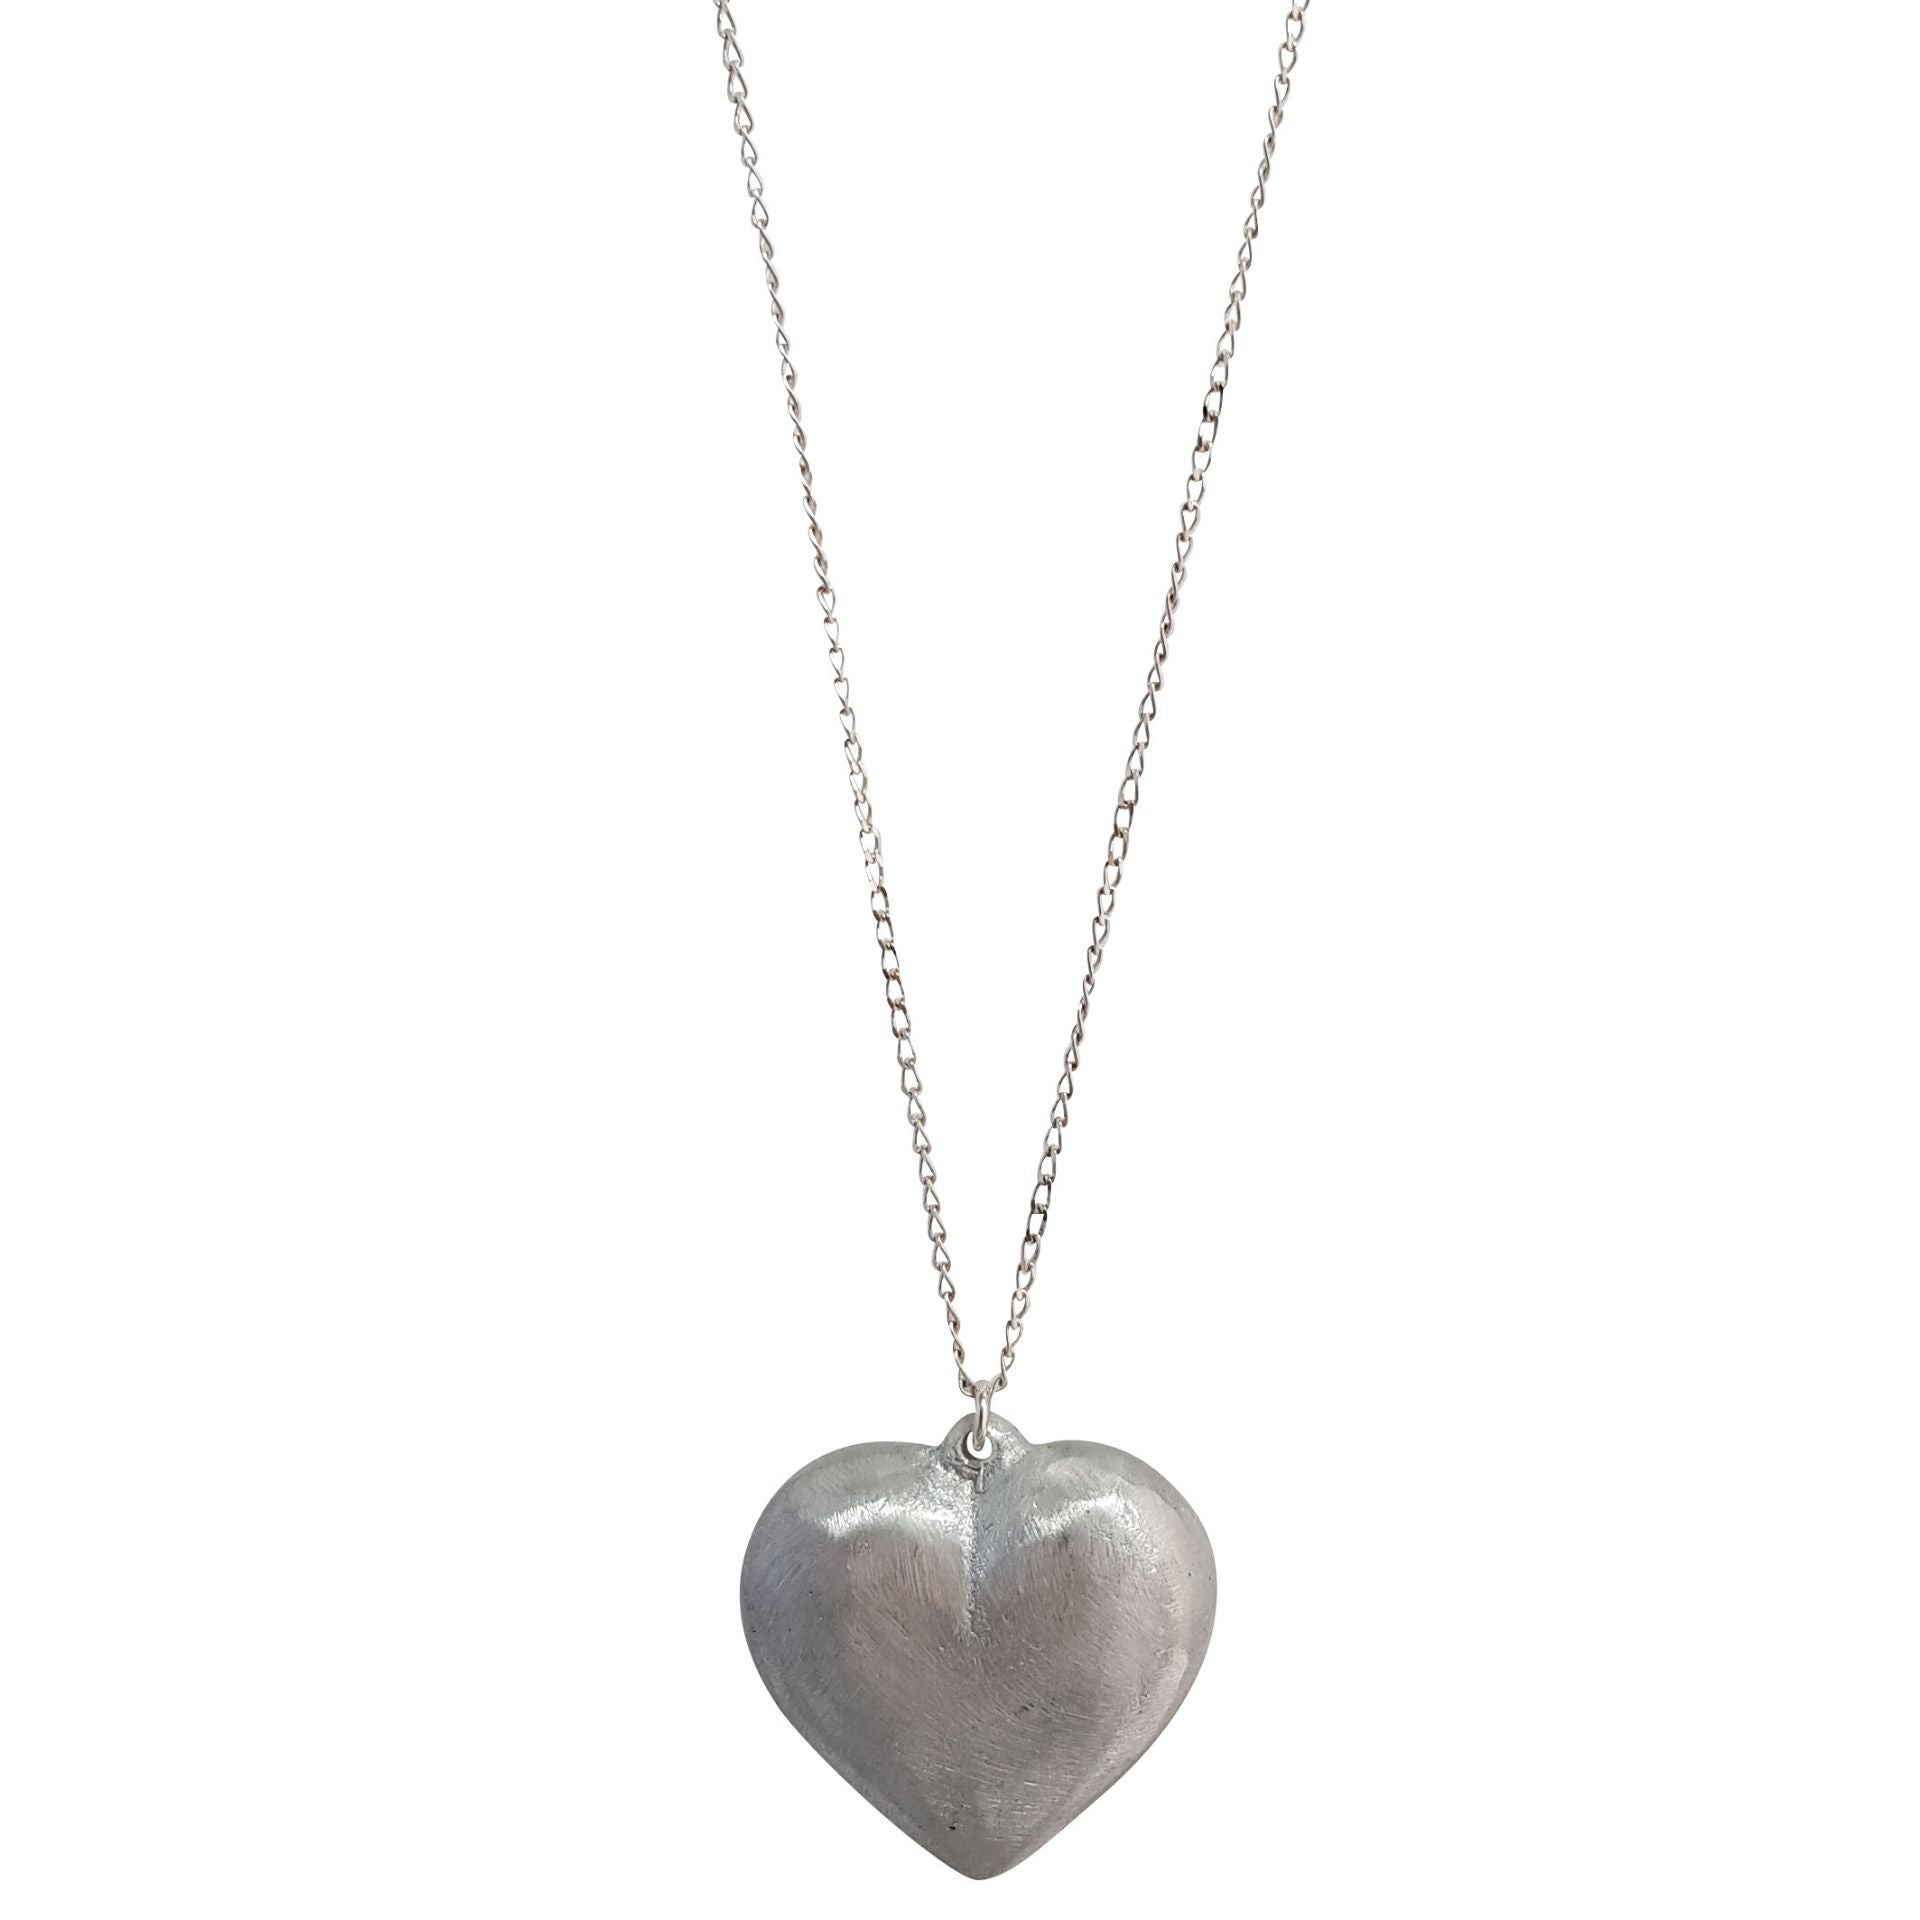 LOVEbomb Large Heart Pendant on Long Sterling Silver Chain